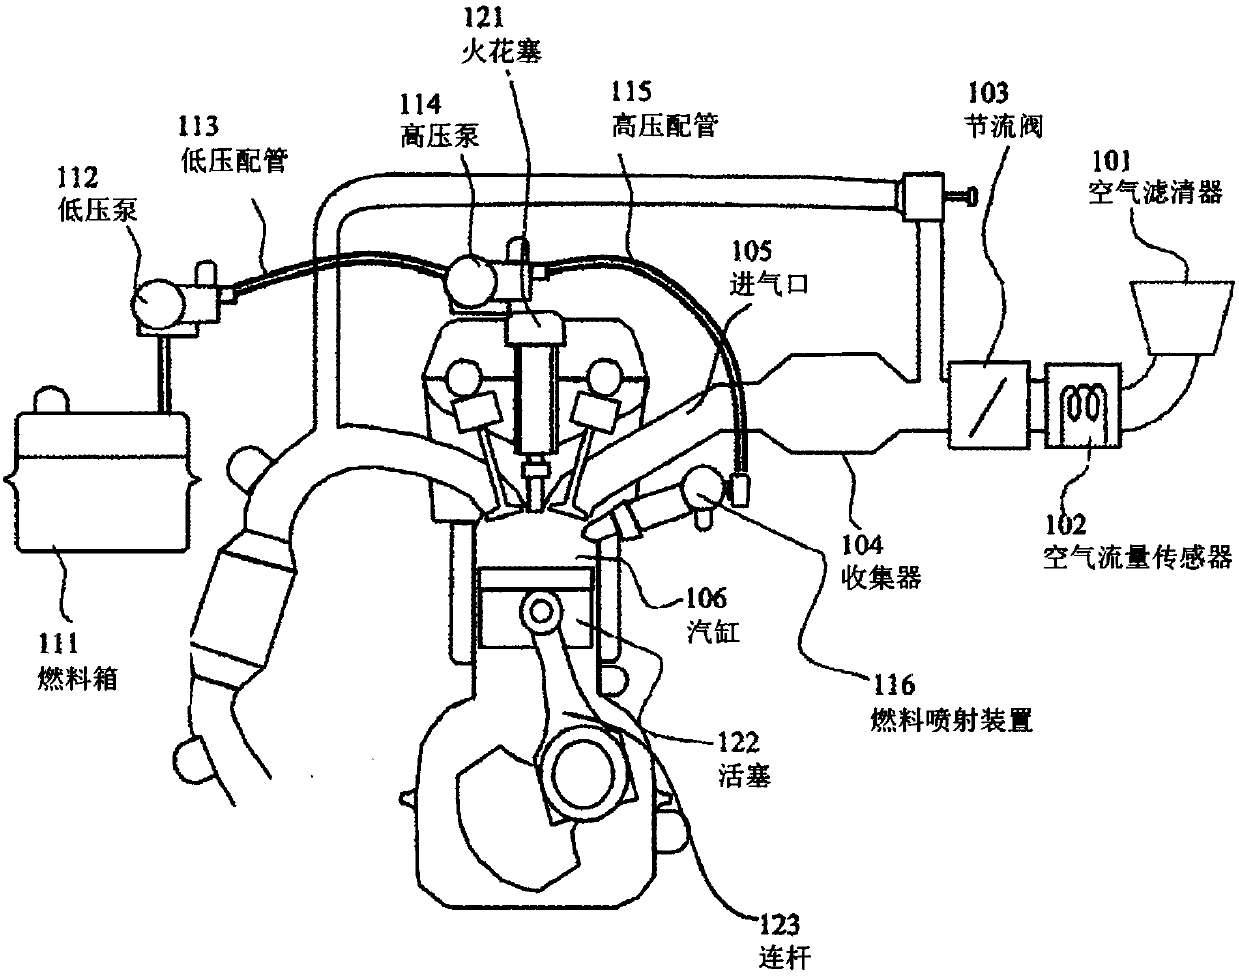 Control device of fuel injection device